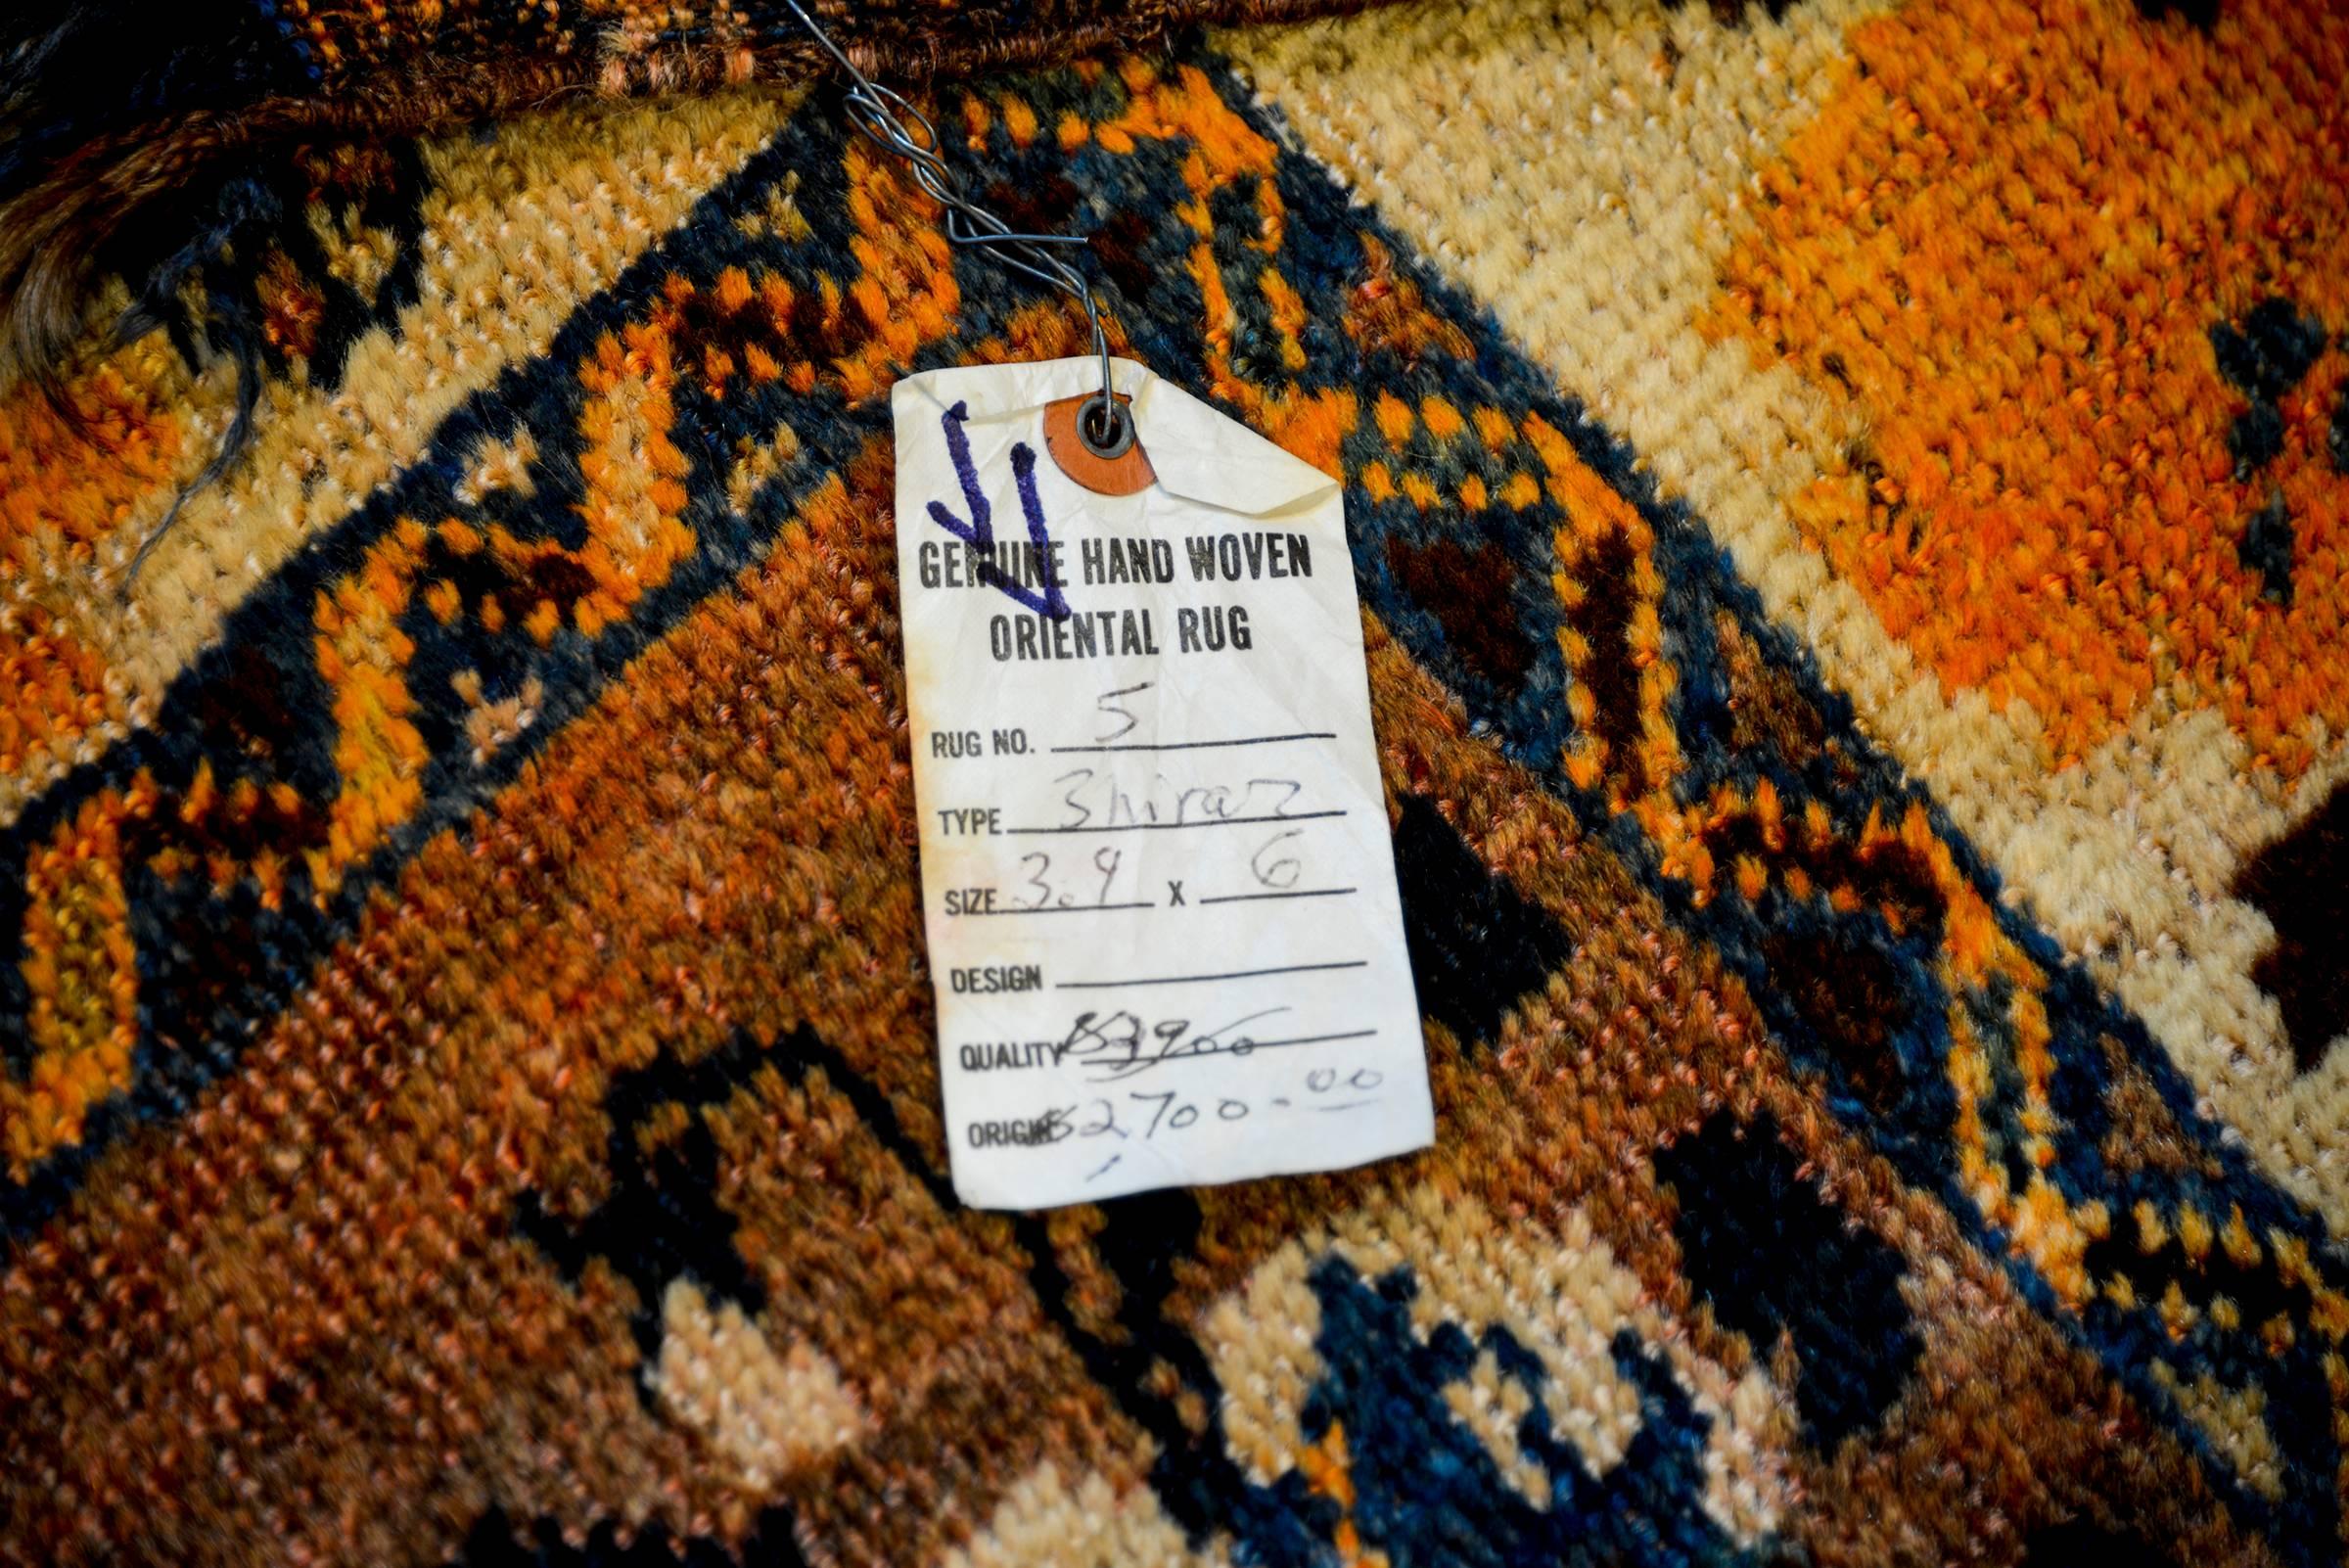 A unique late 20th century Shiraz rug with a beautiful all-over light and dark indigo, gold and brown floral pattern on an abrash crimson background that fades from light to dark across the field. The border is fantastic with a wide large-scale